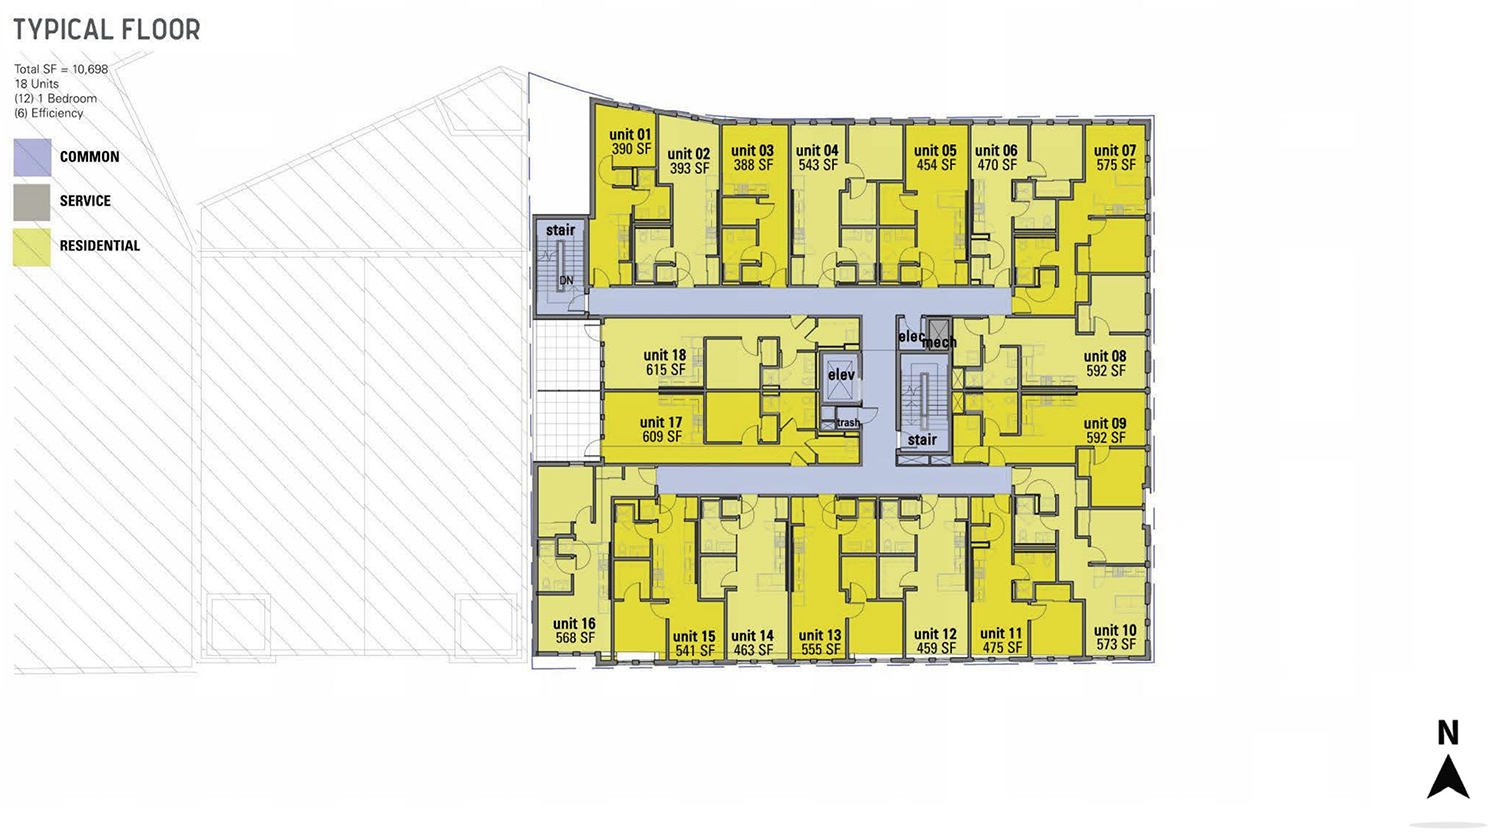 Typical Residential Floor Plan for 4600 N Kenmore Avenue. Drawing by Level Architecture